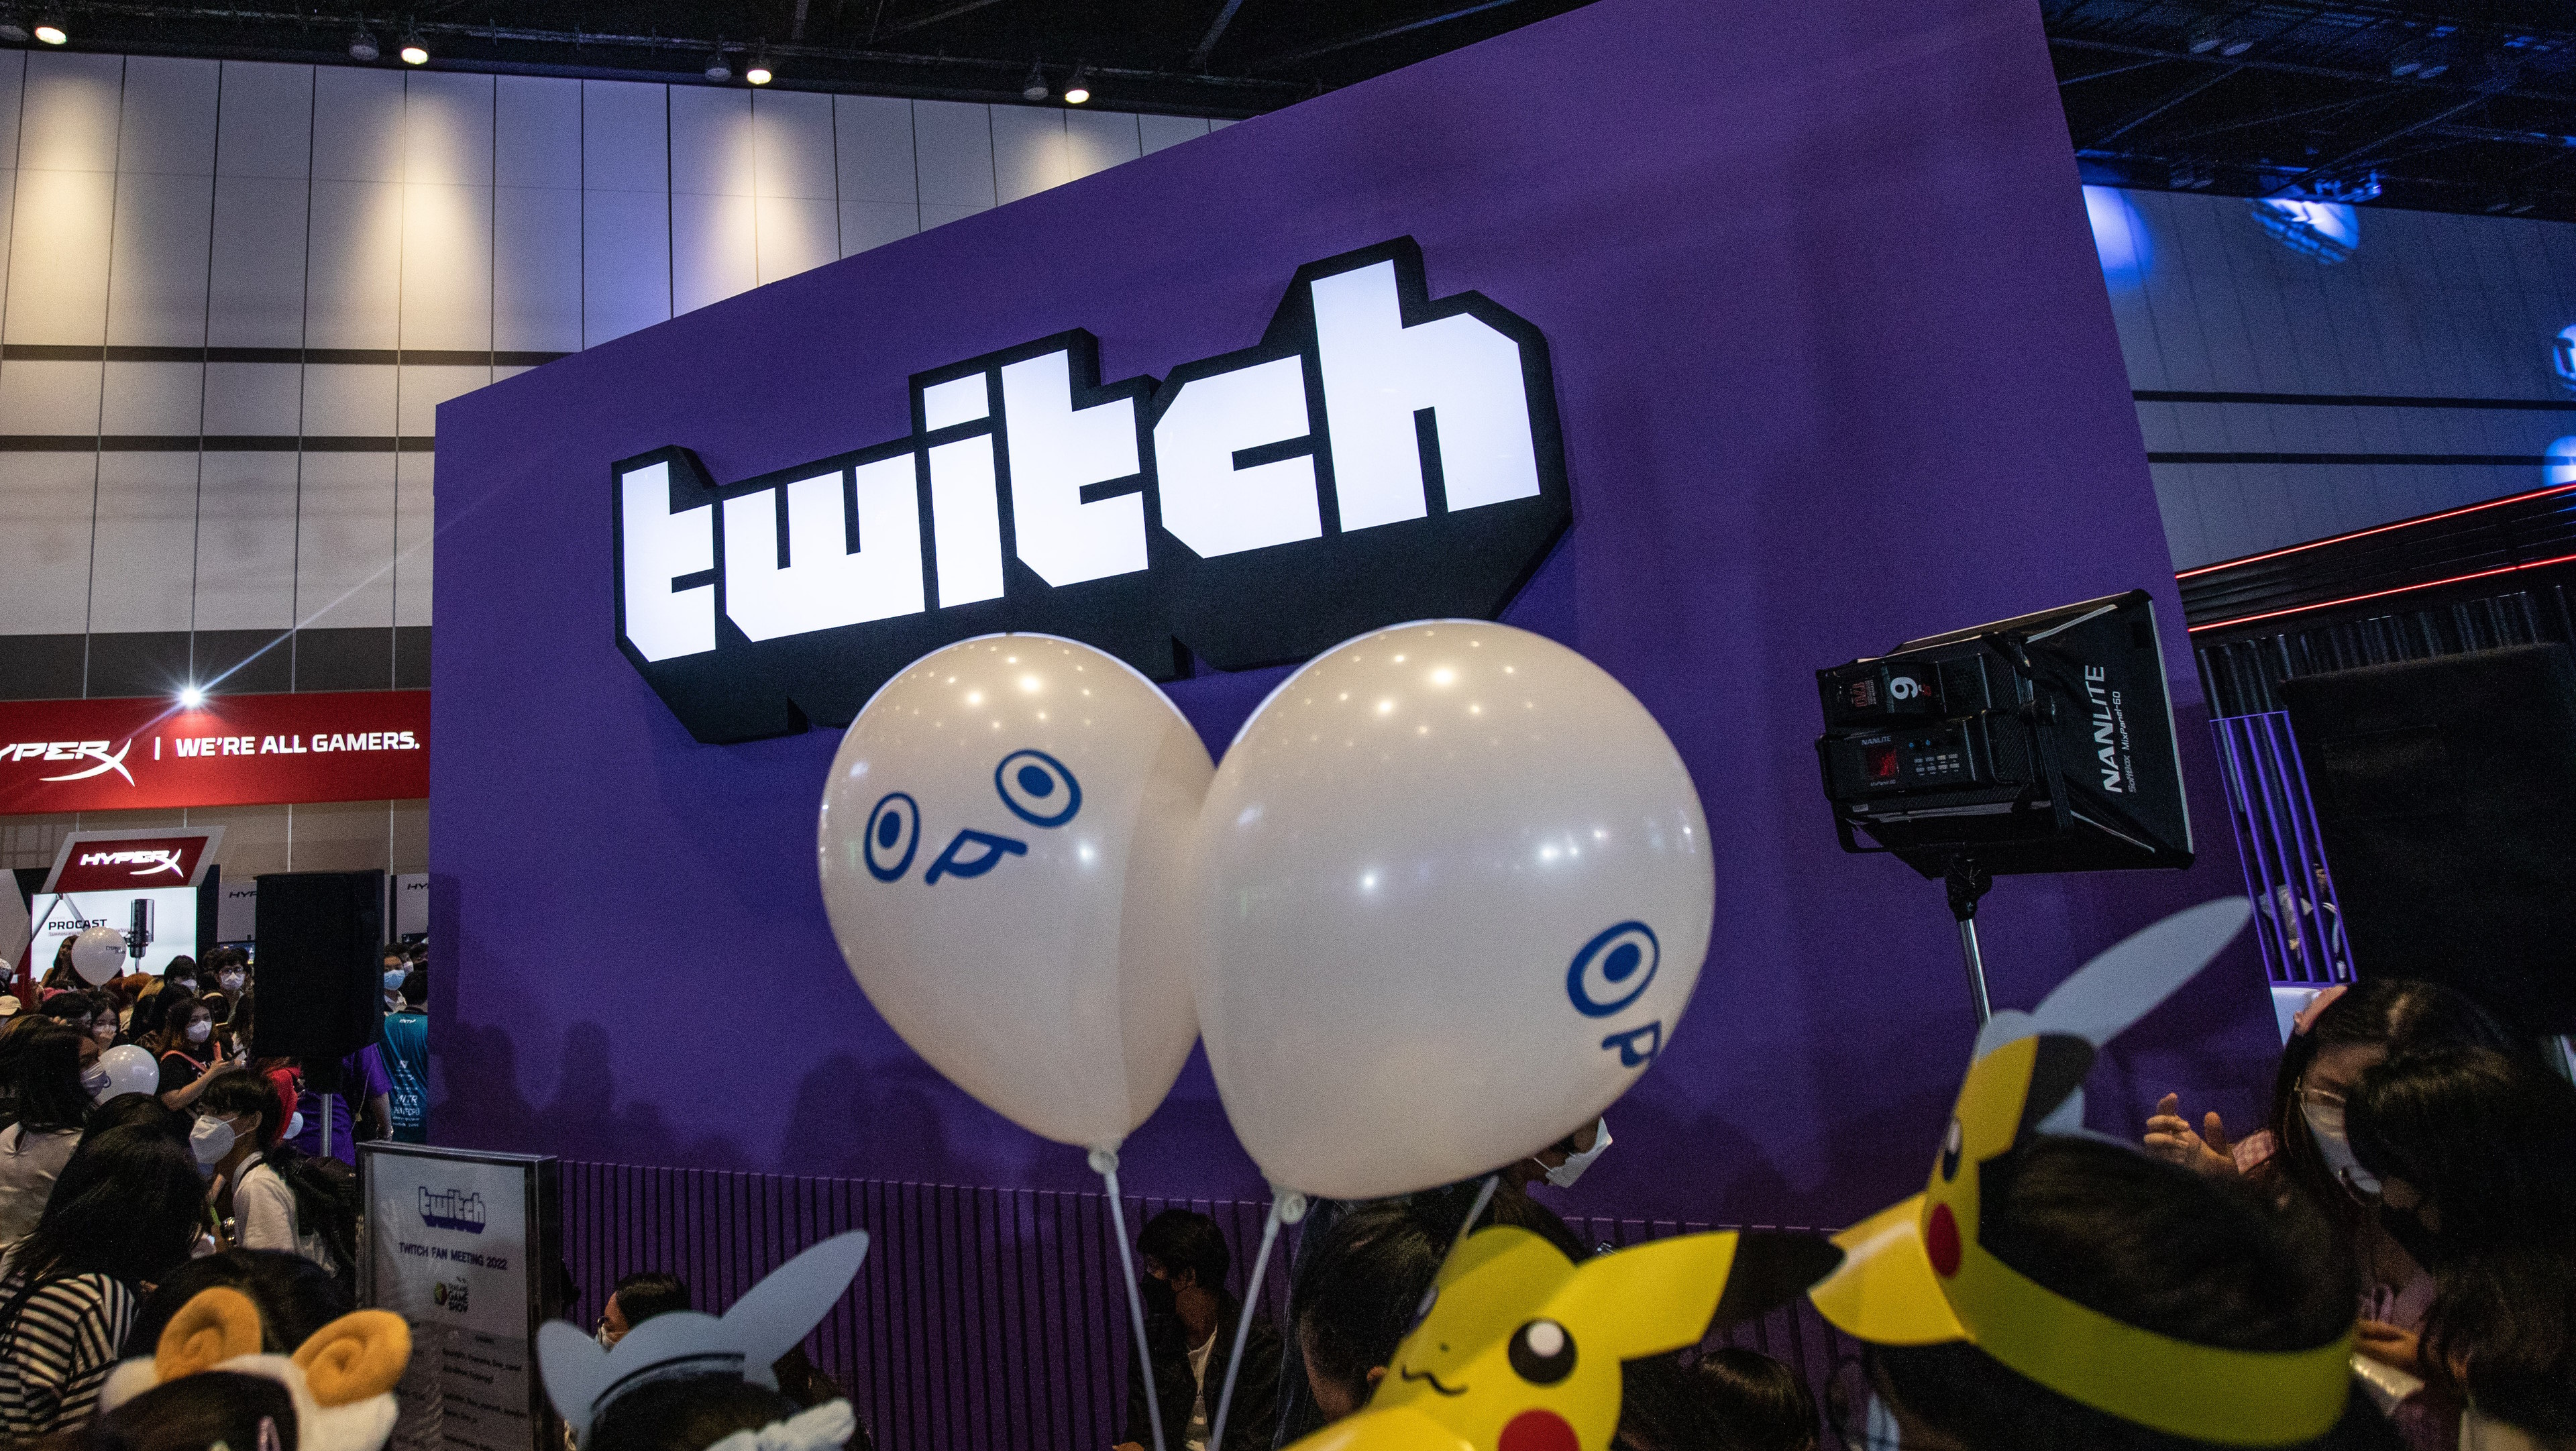  Twitch's nudity laws continue to shift: Cleavage is 'unrestricted', but no underboob allowed 